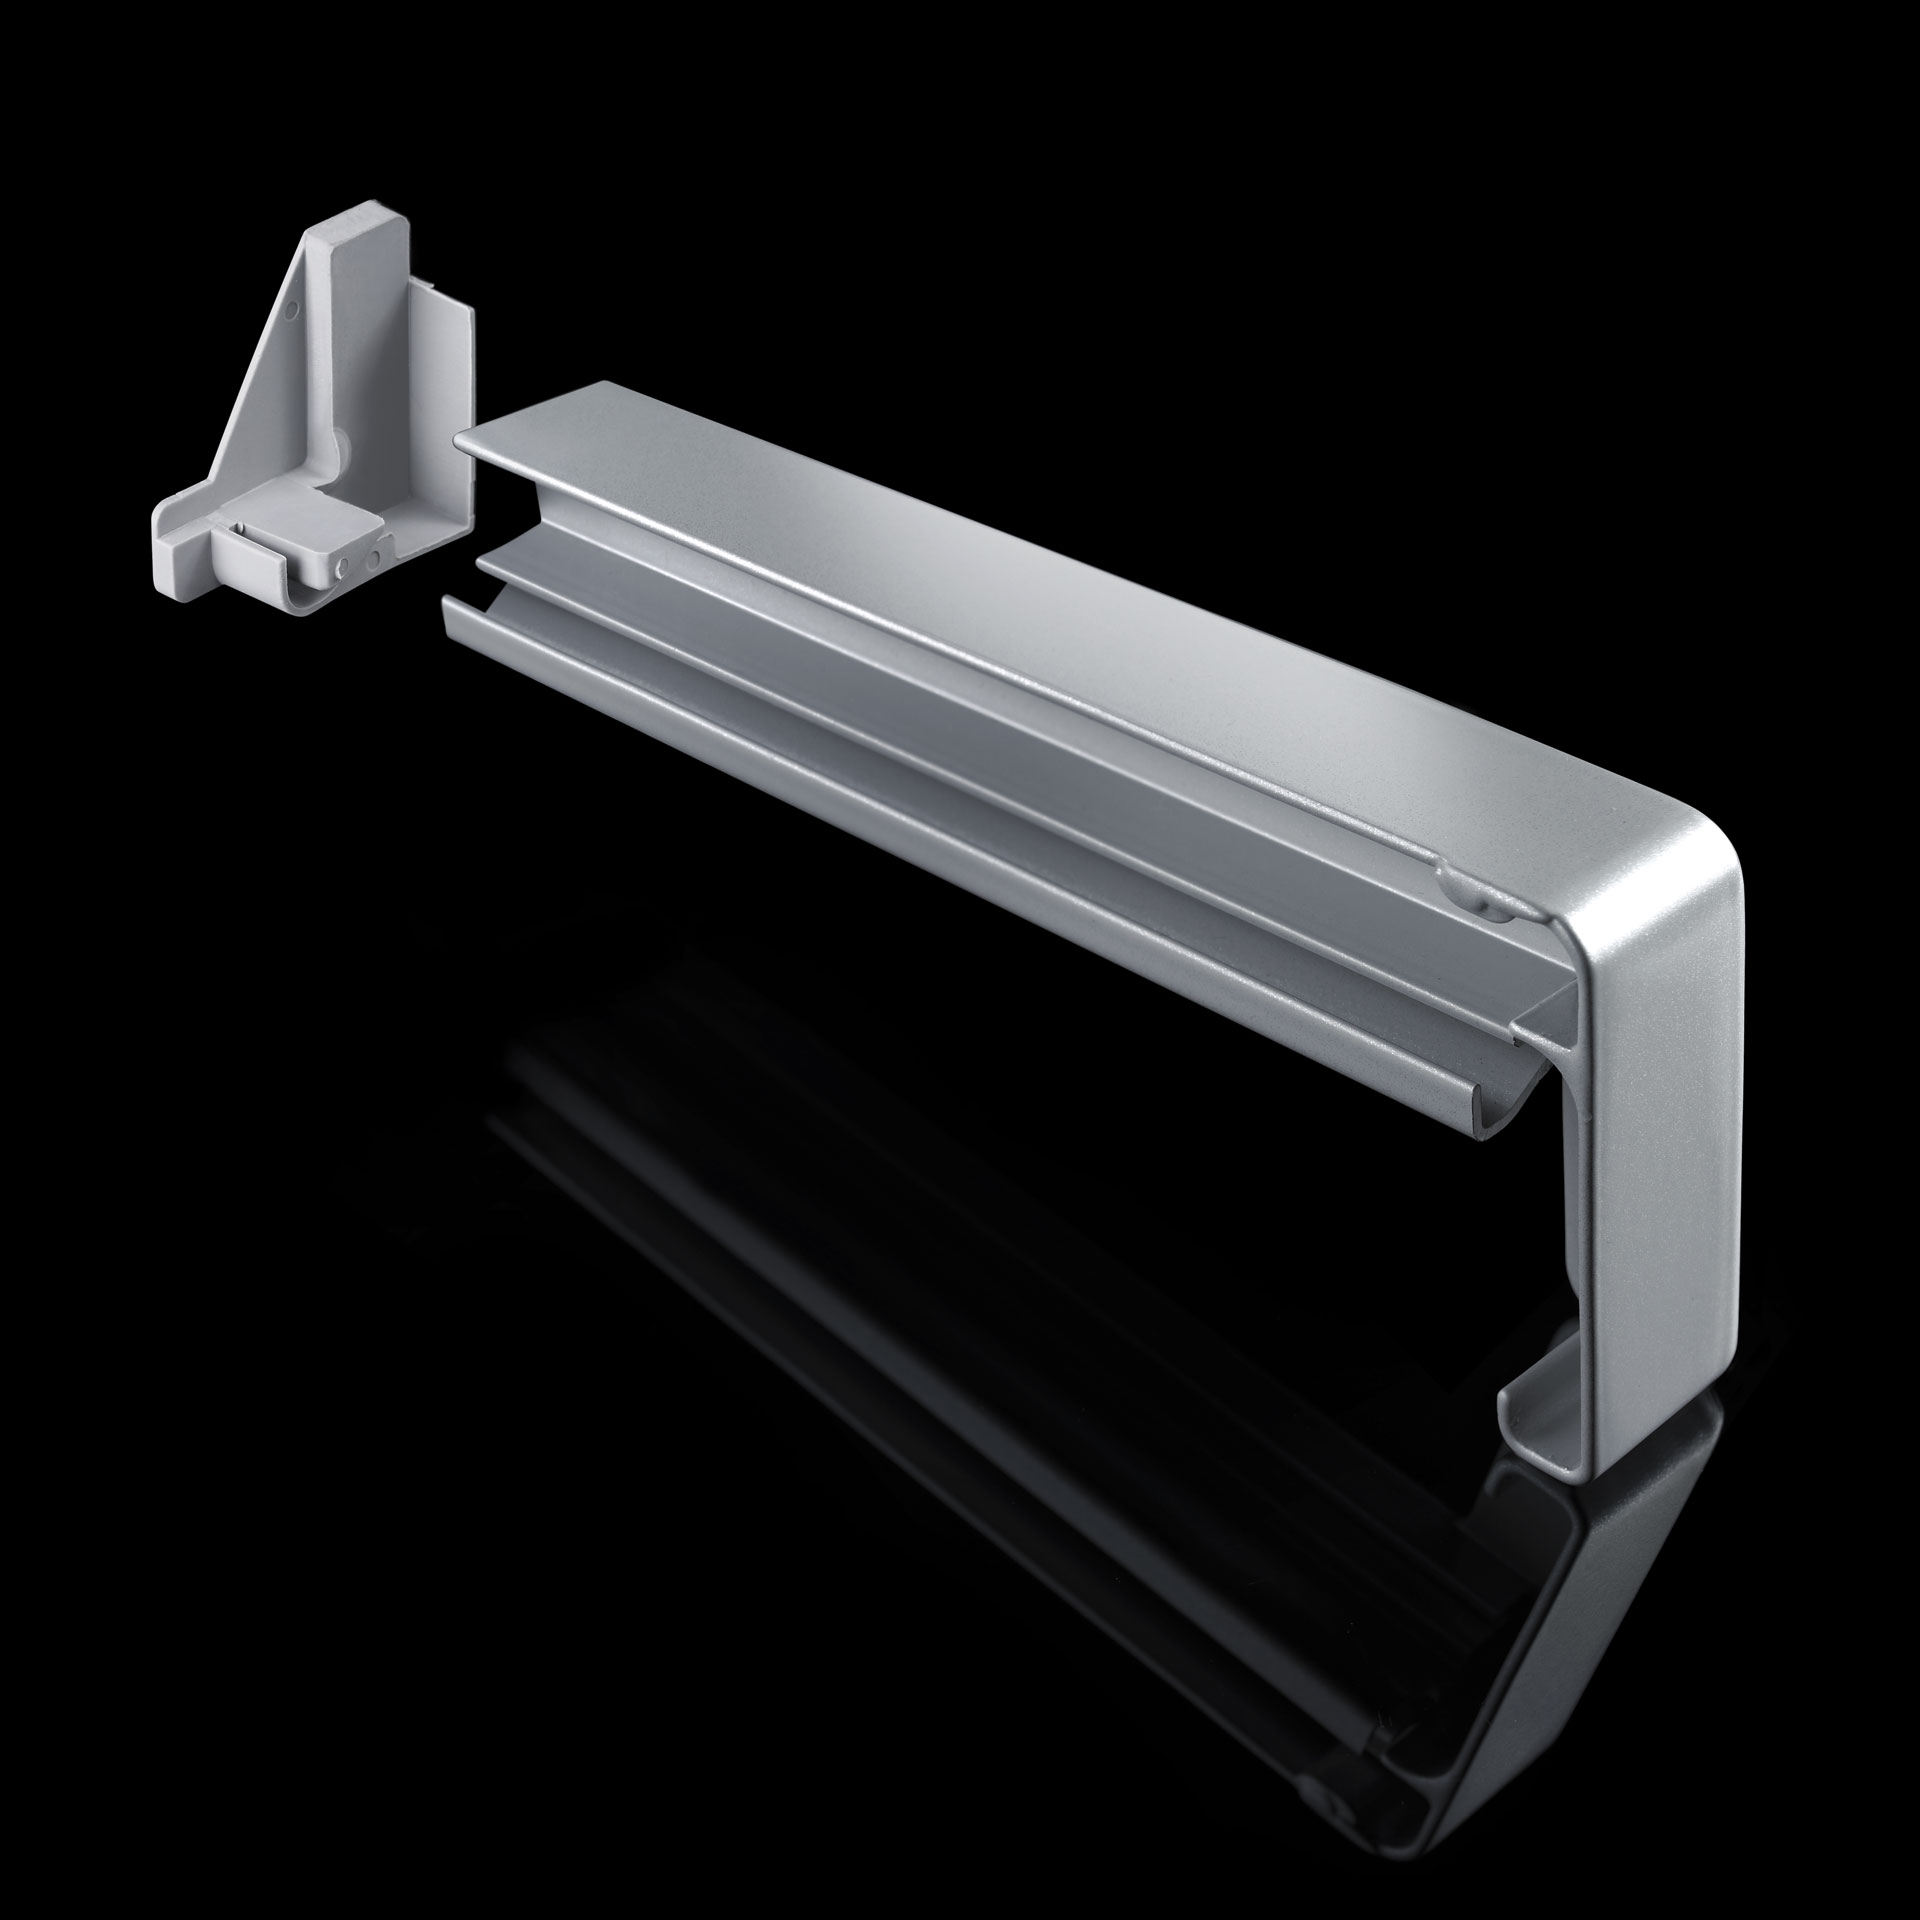 The aluminium sliding closure BF4006 / BF2506 for window sills has an integrated expansion compensation stainless steel spring.It is usable in external thermal insulation composite systems (ETICS) and is resistant to heavy rain. Overhangs: 50 - 500 mm.